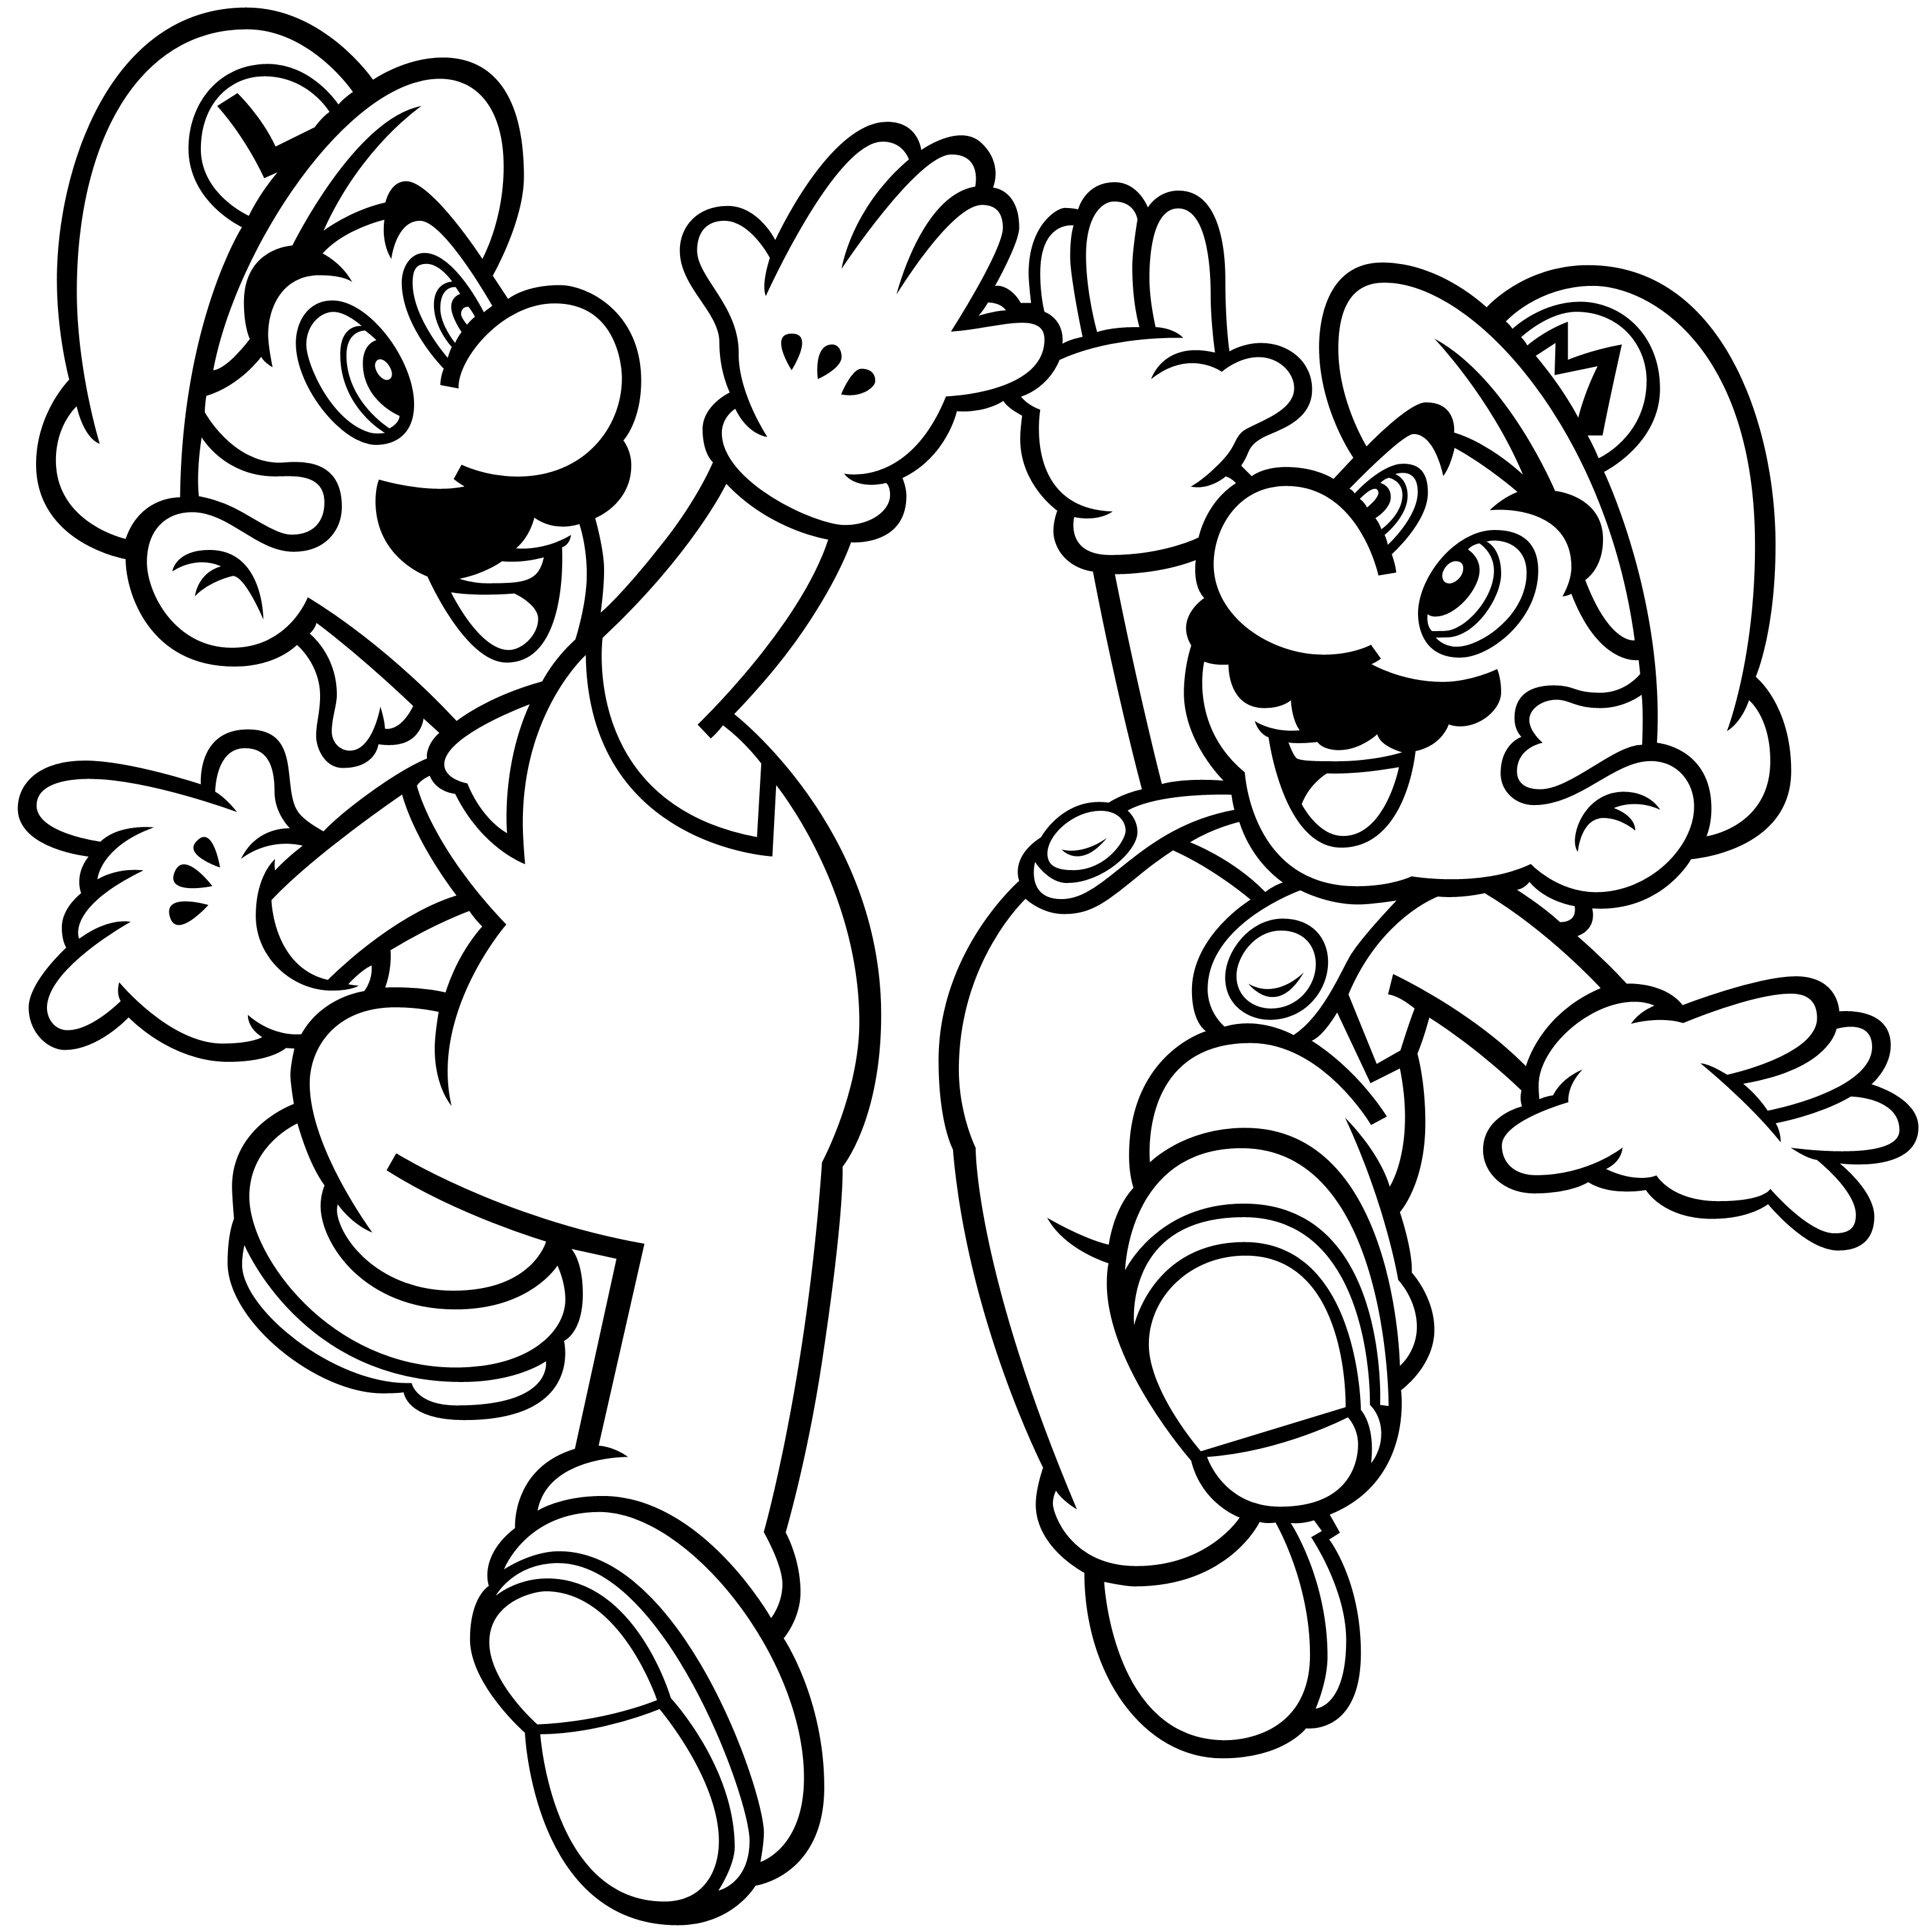 Yoshi Jumping Coloring Page Free Printable Coloring Pages Mario Brothers Party Pinterest